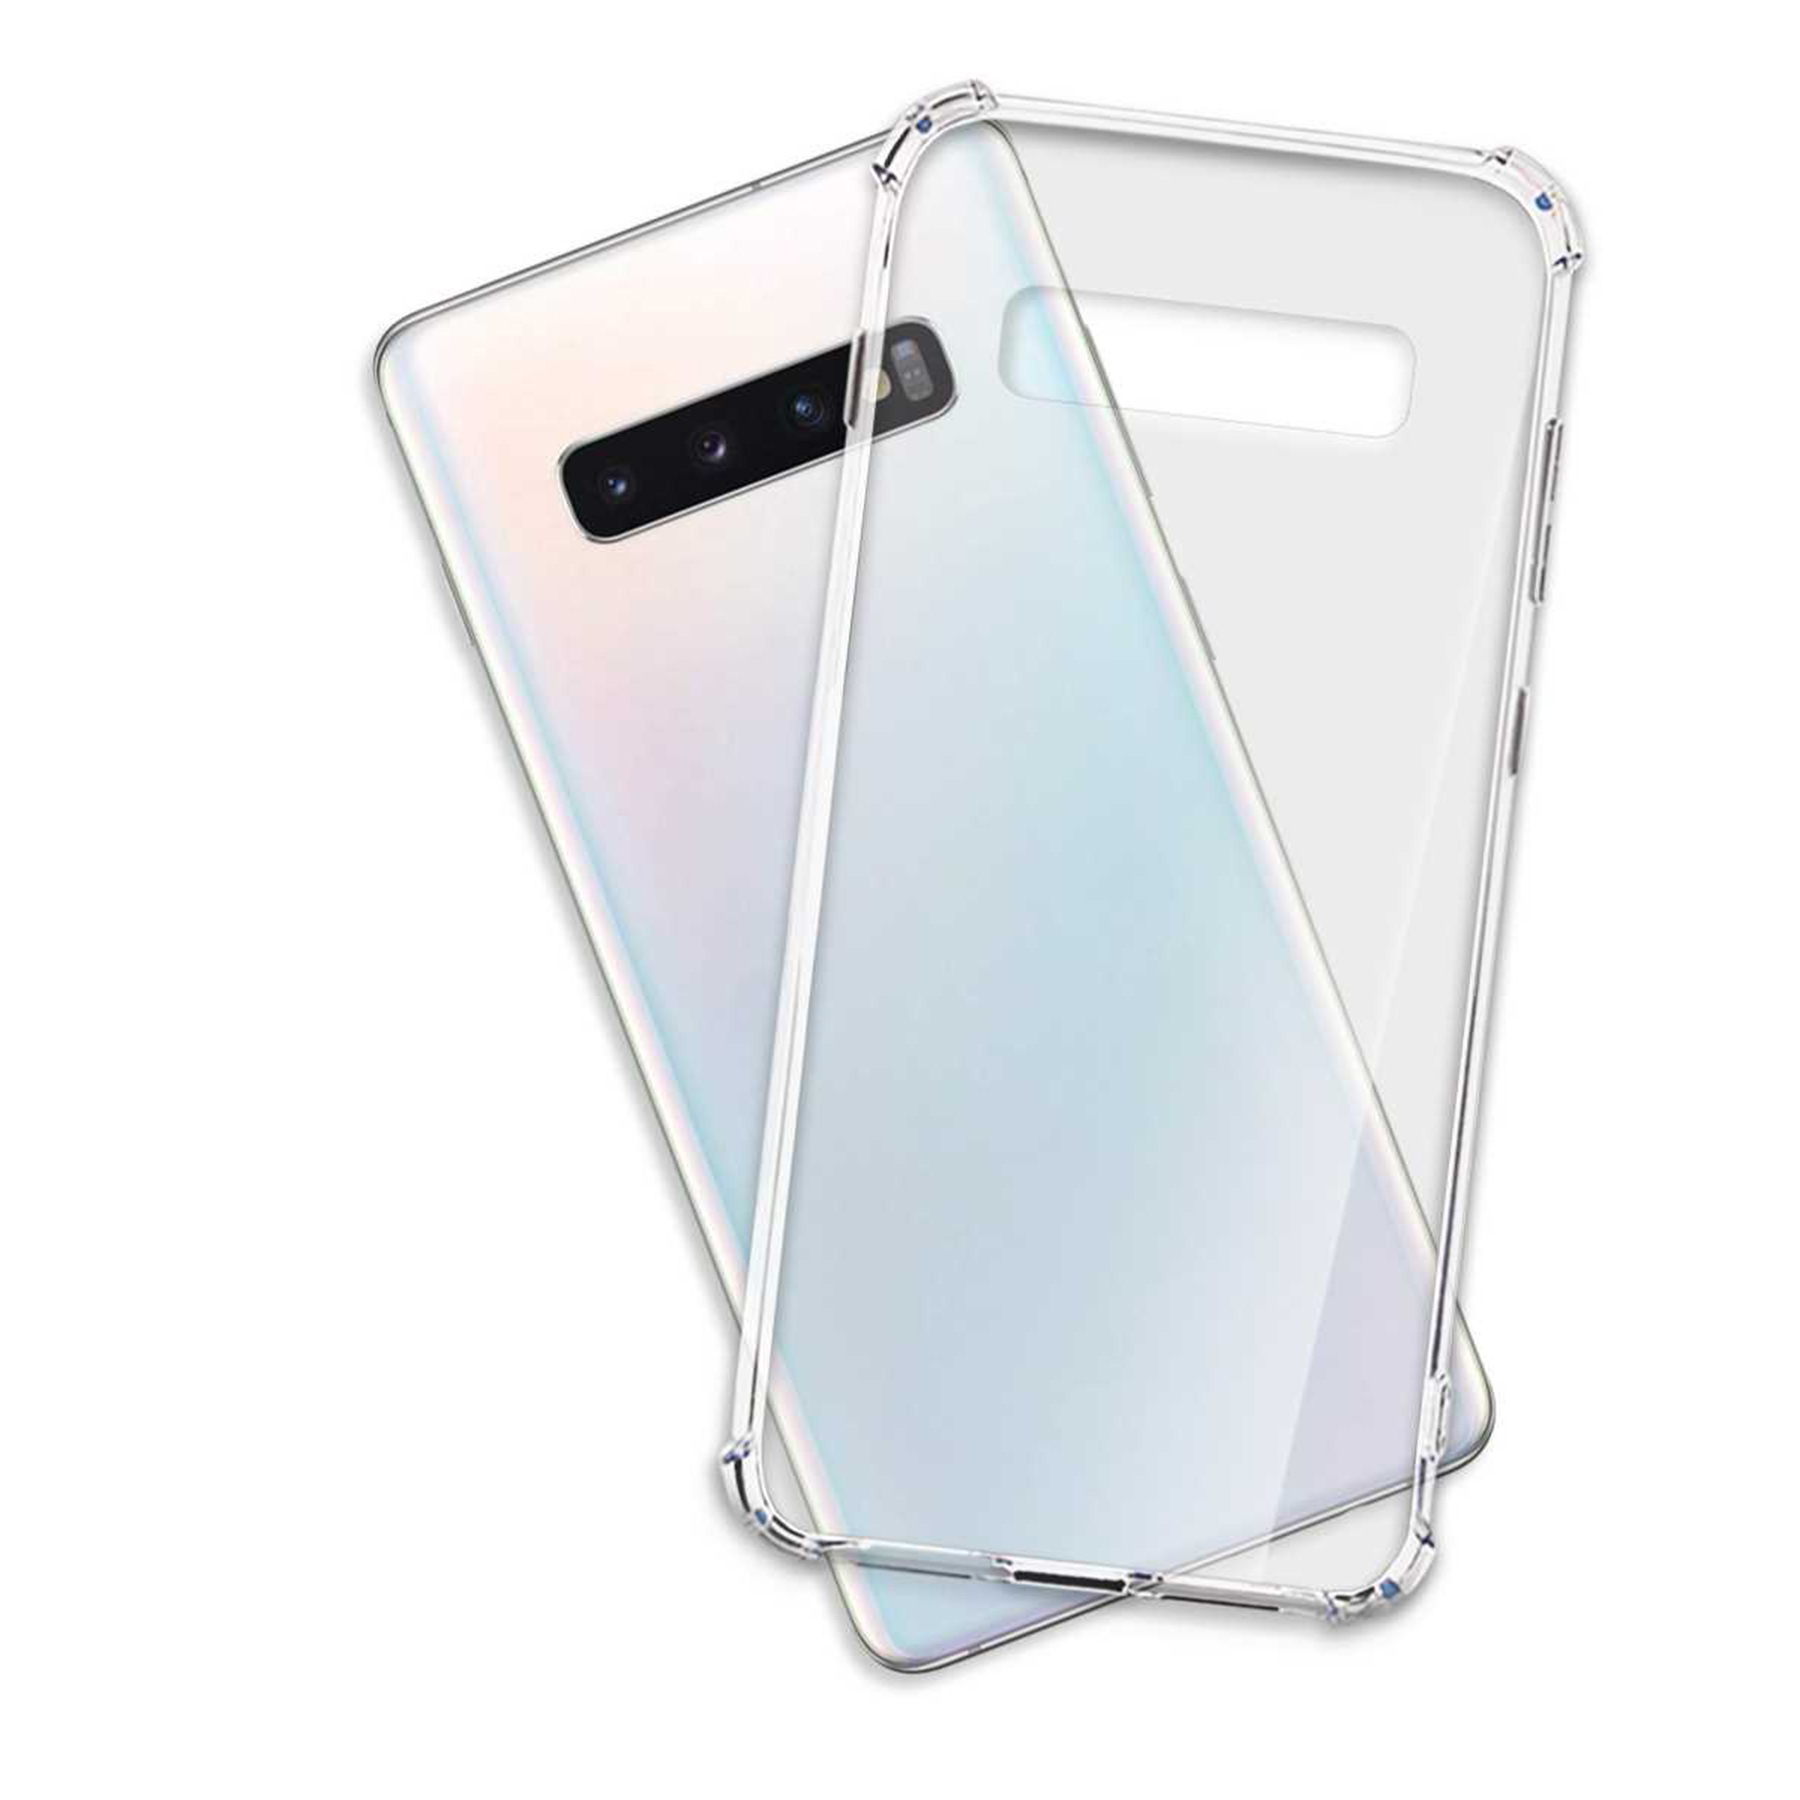 MTB ENERGY Clear Case, Transparent Armor S10, Galaxy Samsung, Backcover, MORE